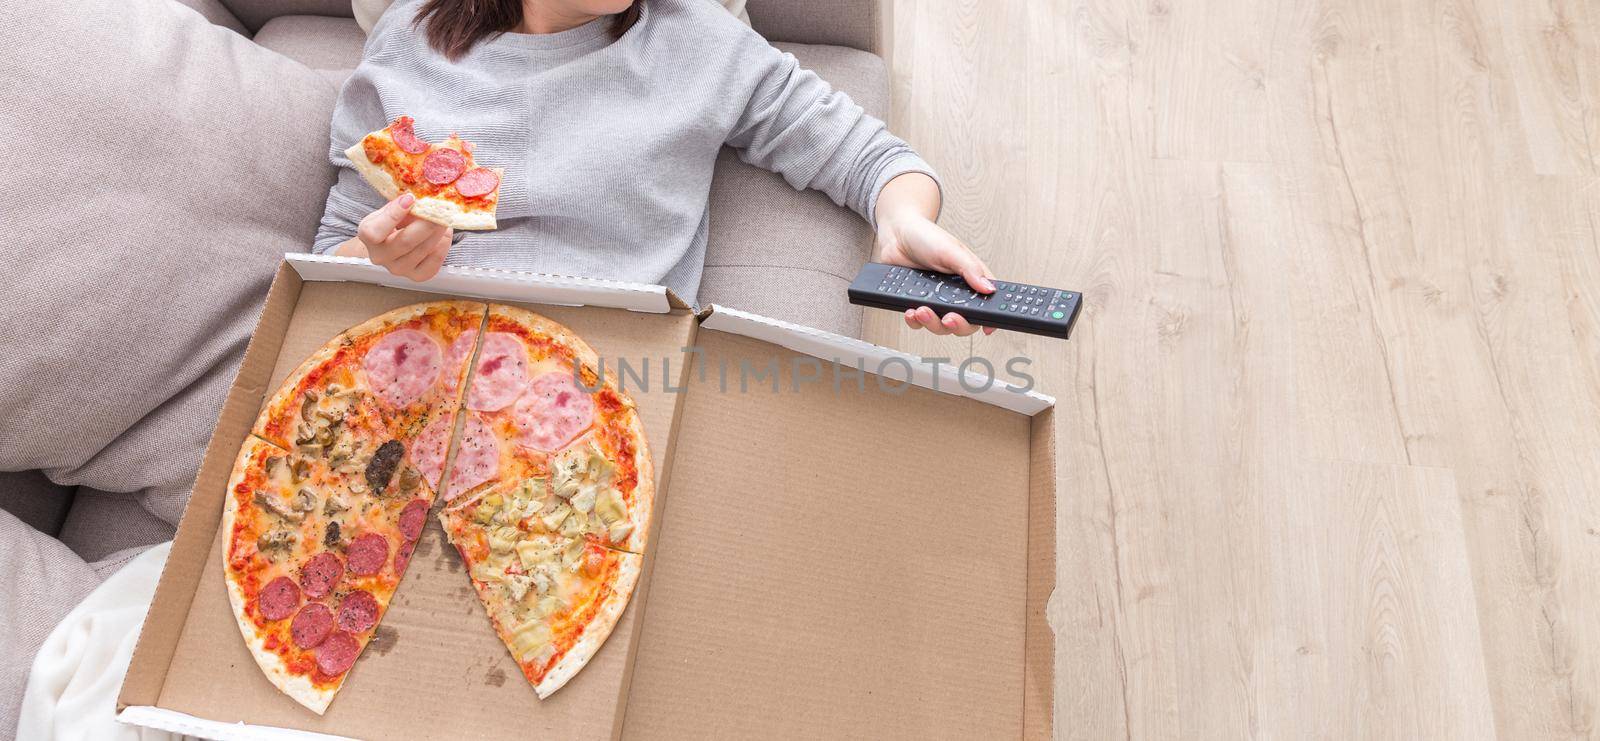 woman eating pizza image taken from above by Mariakray